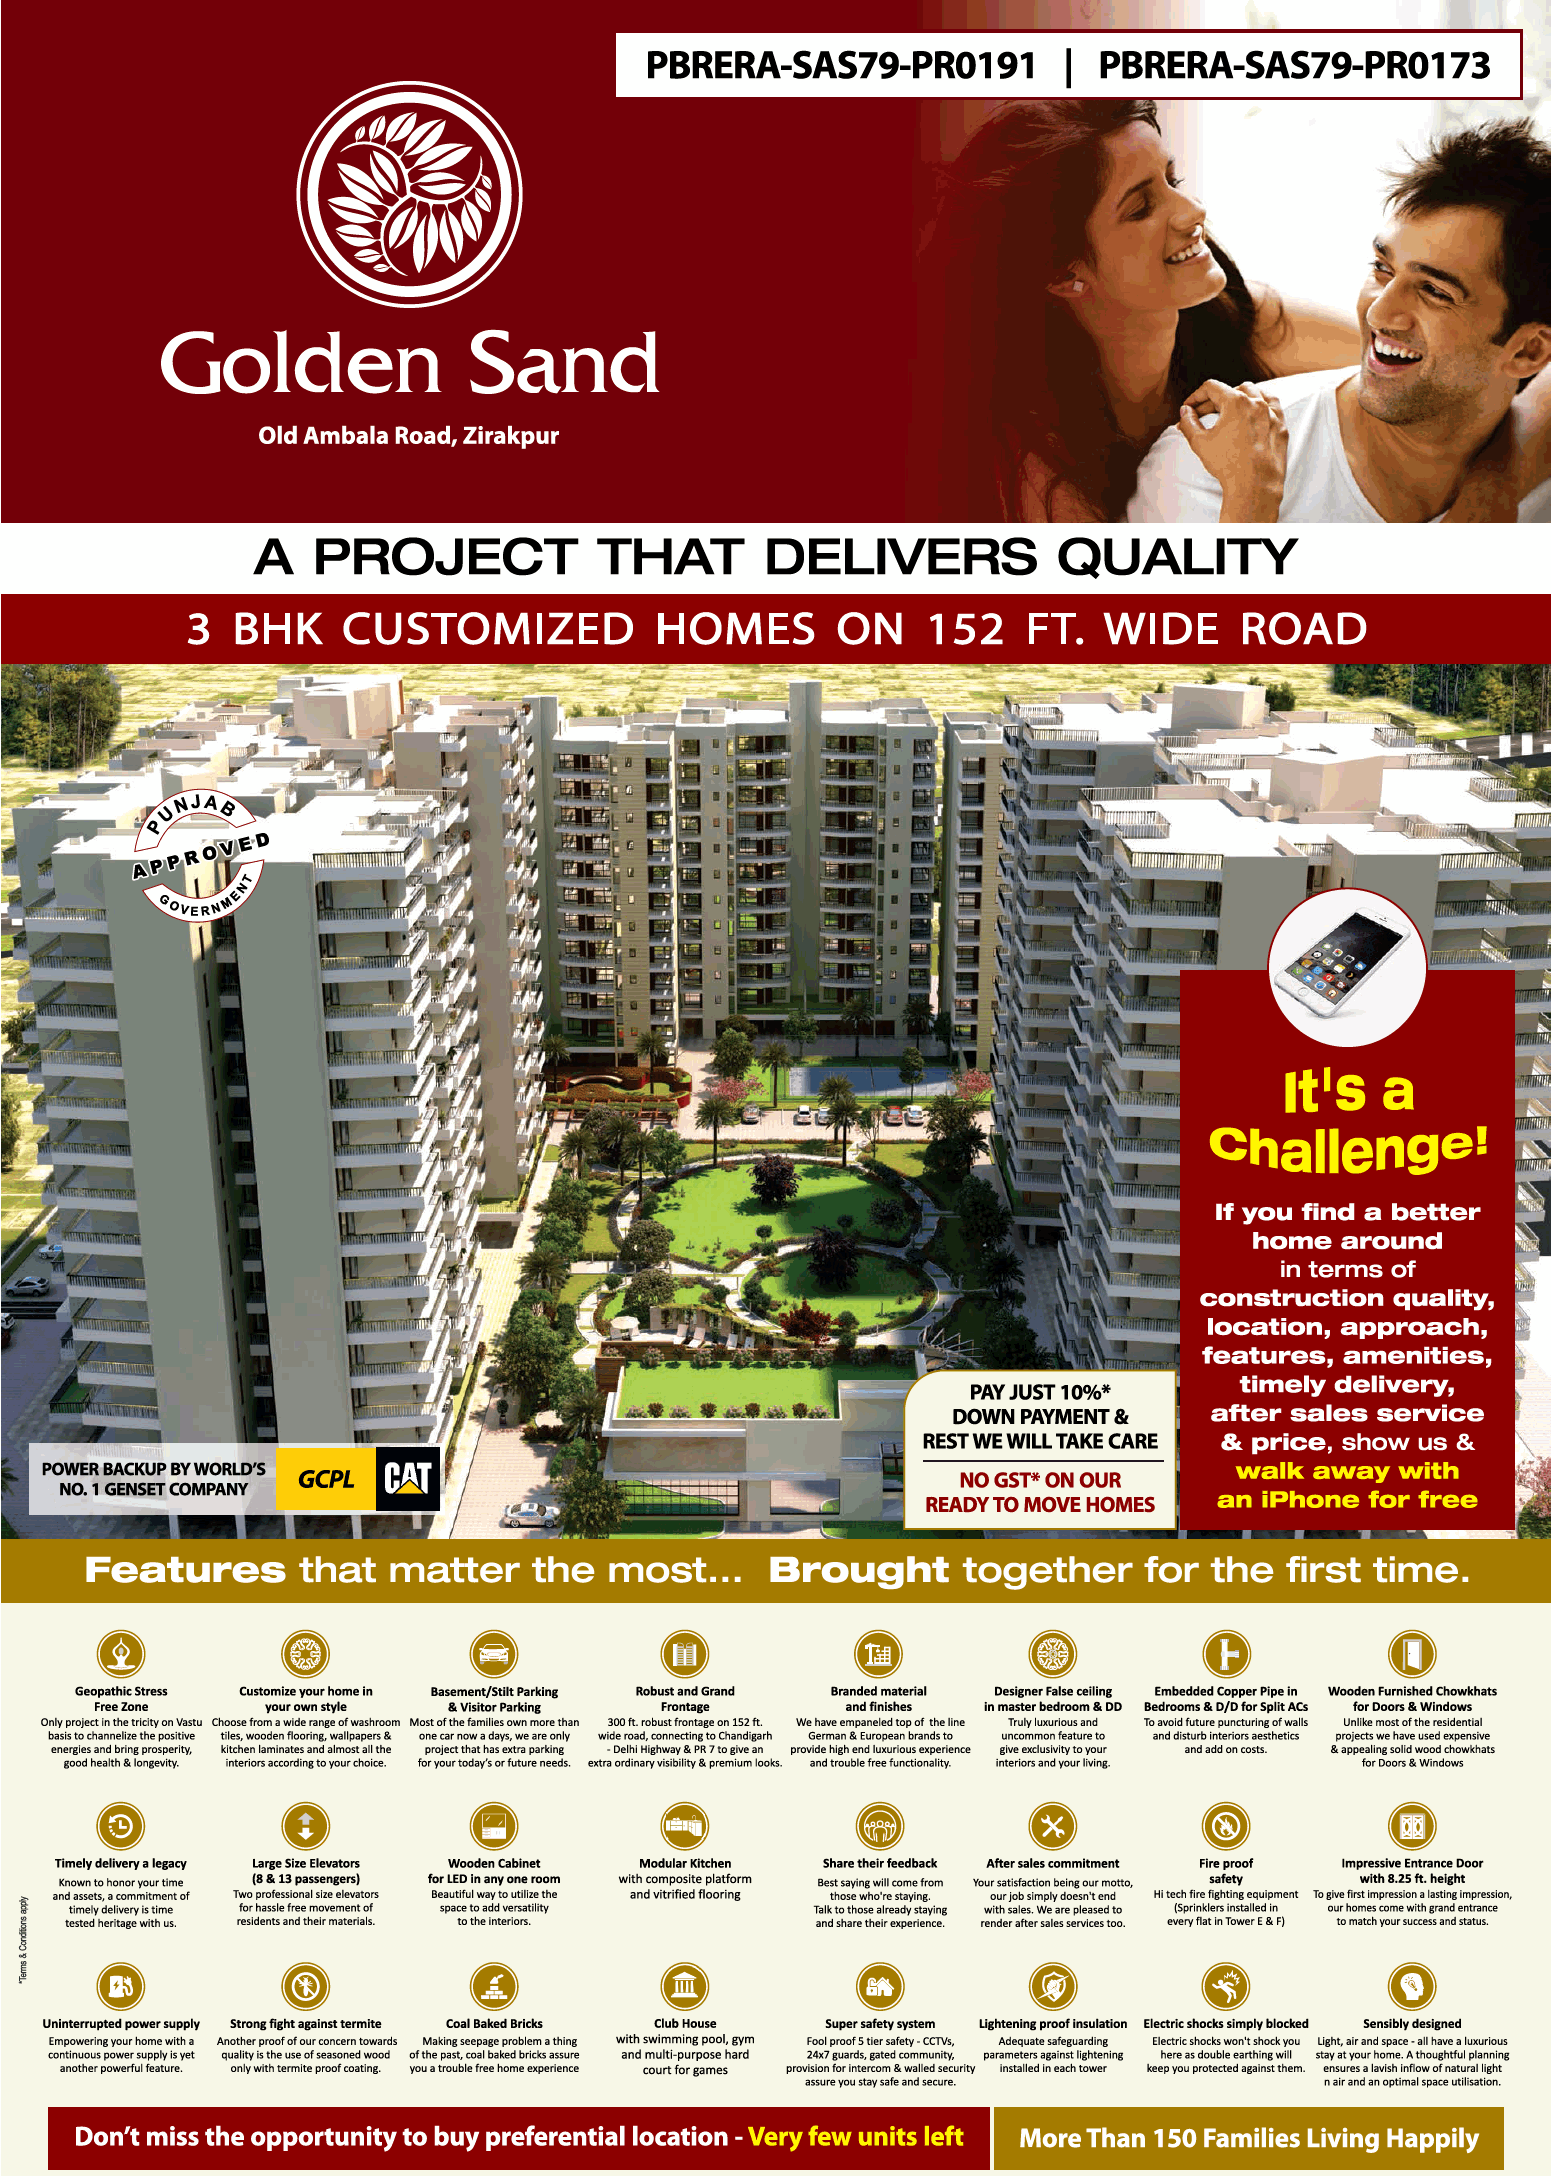 Avail 3 bhk customized homes on 152 ft. wide road at Golden Sand in Chandigarh Update